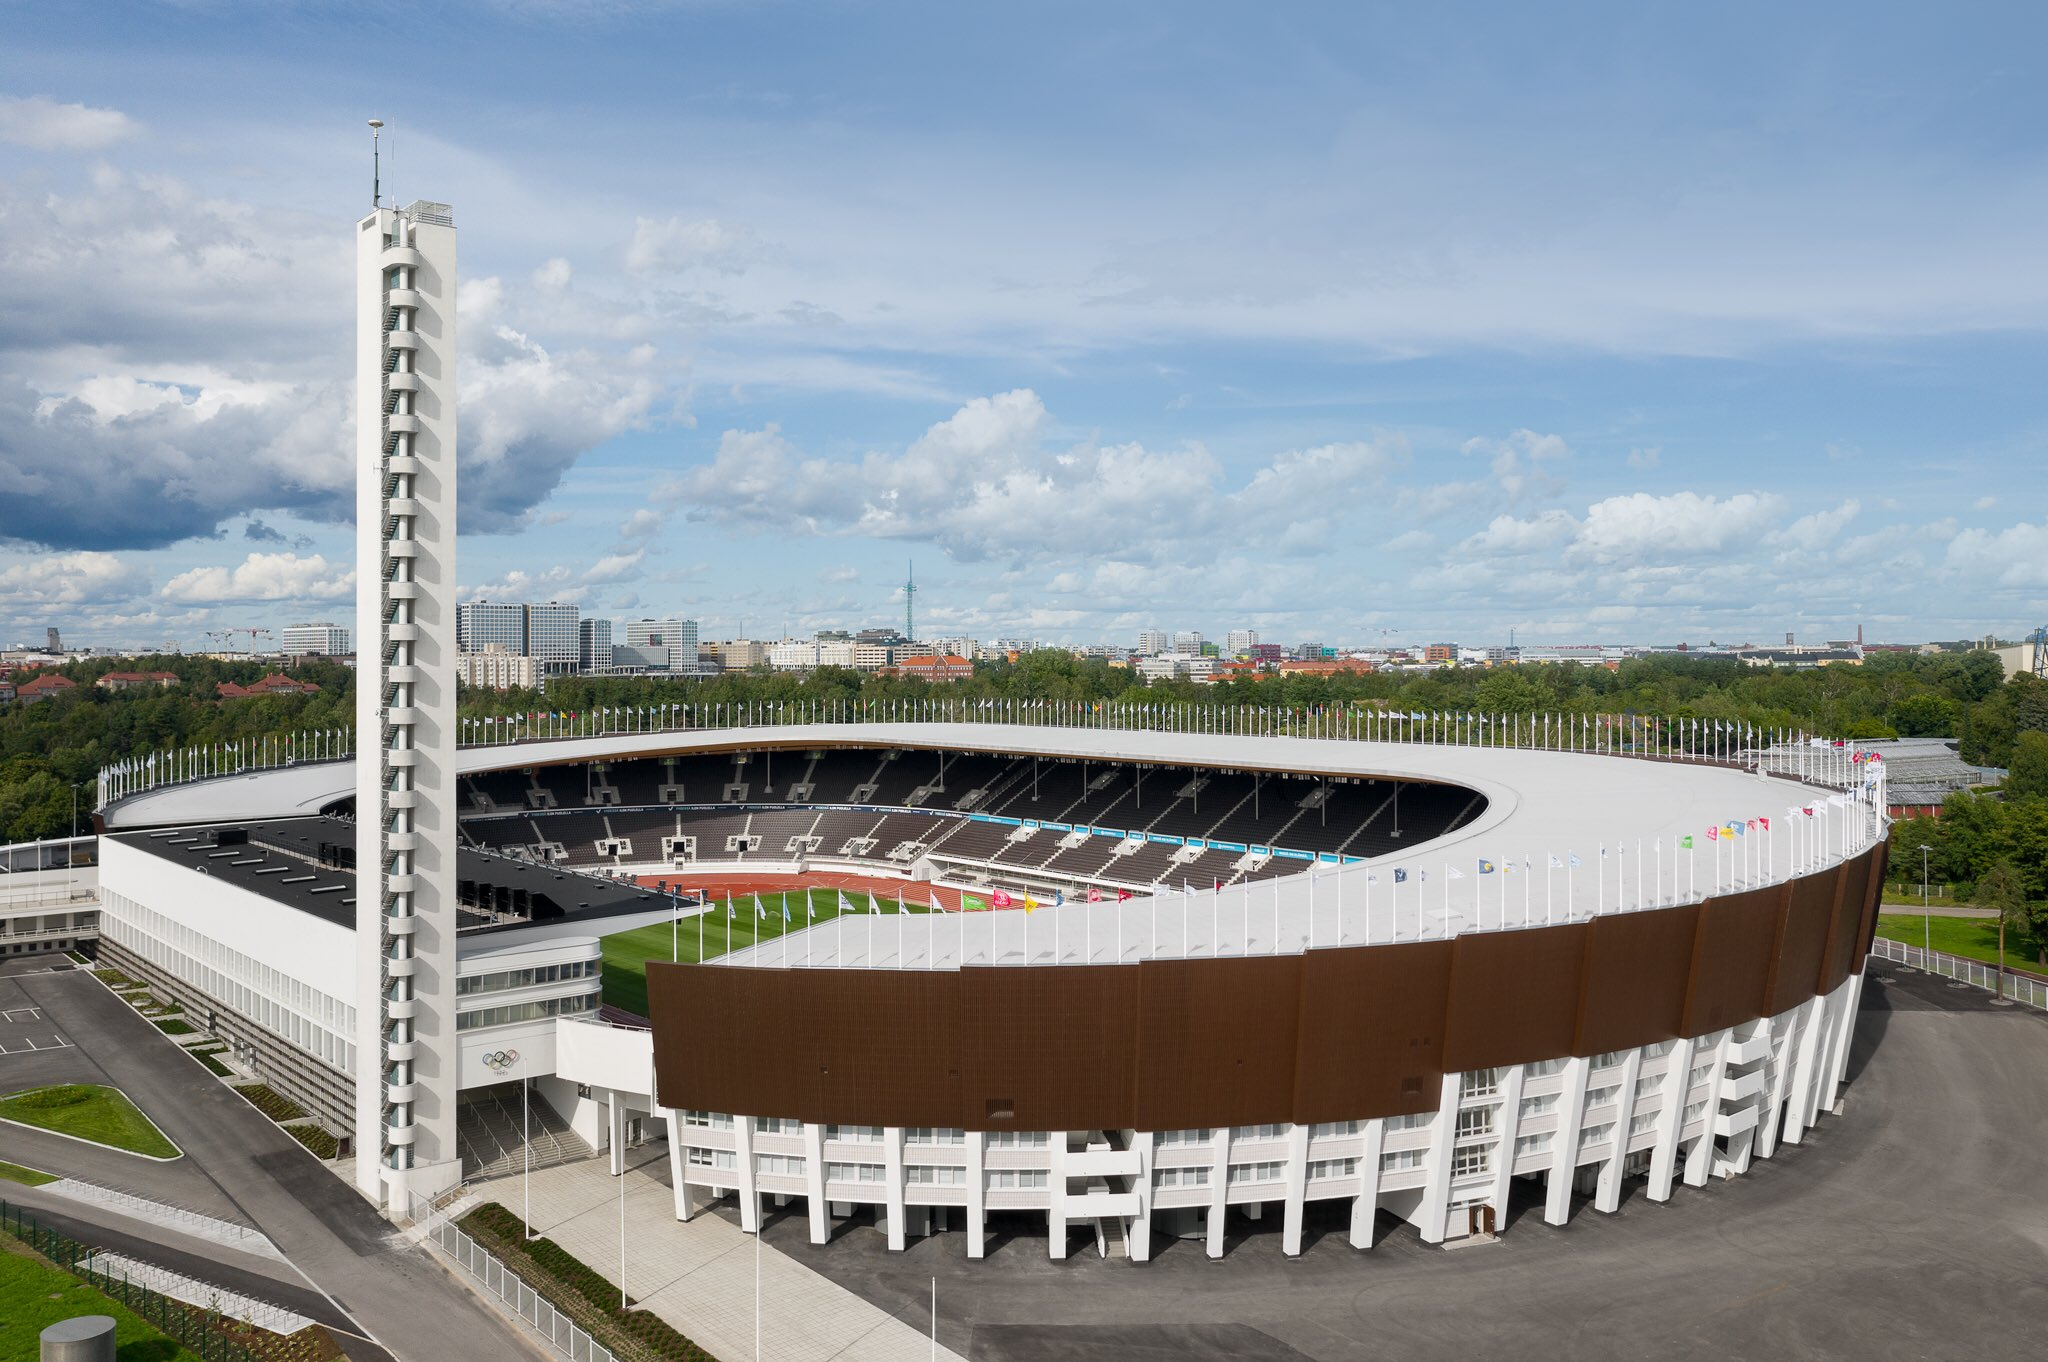 Renovated Helsinki Olympic Stadium to re-open on August 22